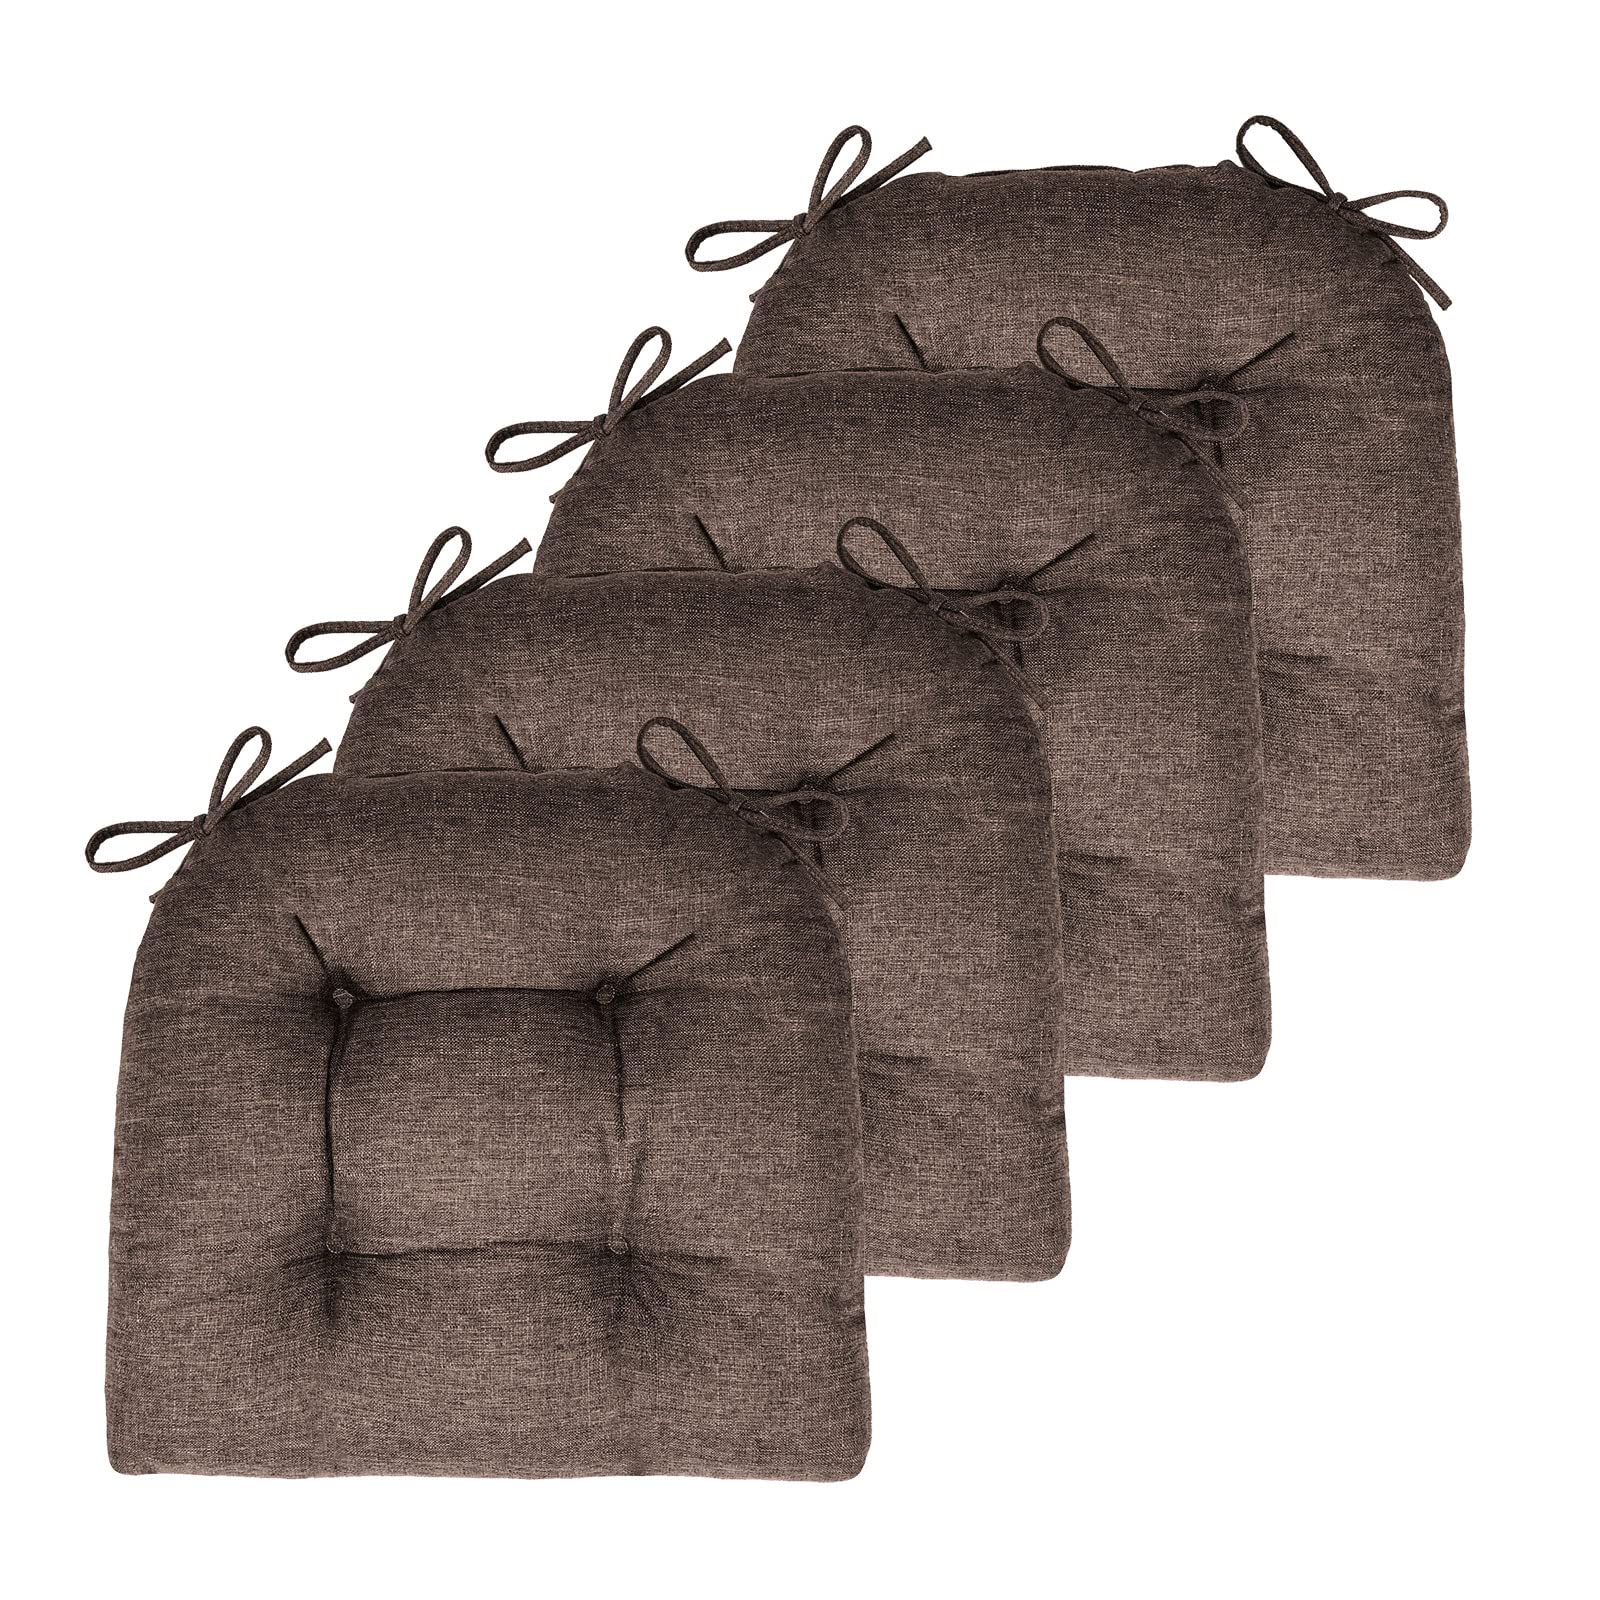 Kyaringtso Chair Cushions for Dining Chairs, 4 Pack Soft and Comfortable Chair Cushions Pads with Ties, Seat Cushions for Kitchen Chairs，Dining Room (4 Pack 17x16, Dark Coffee)